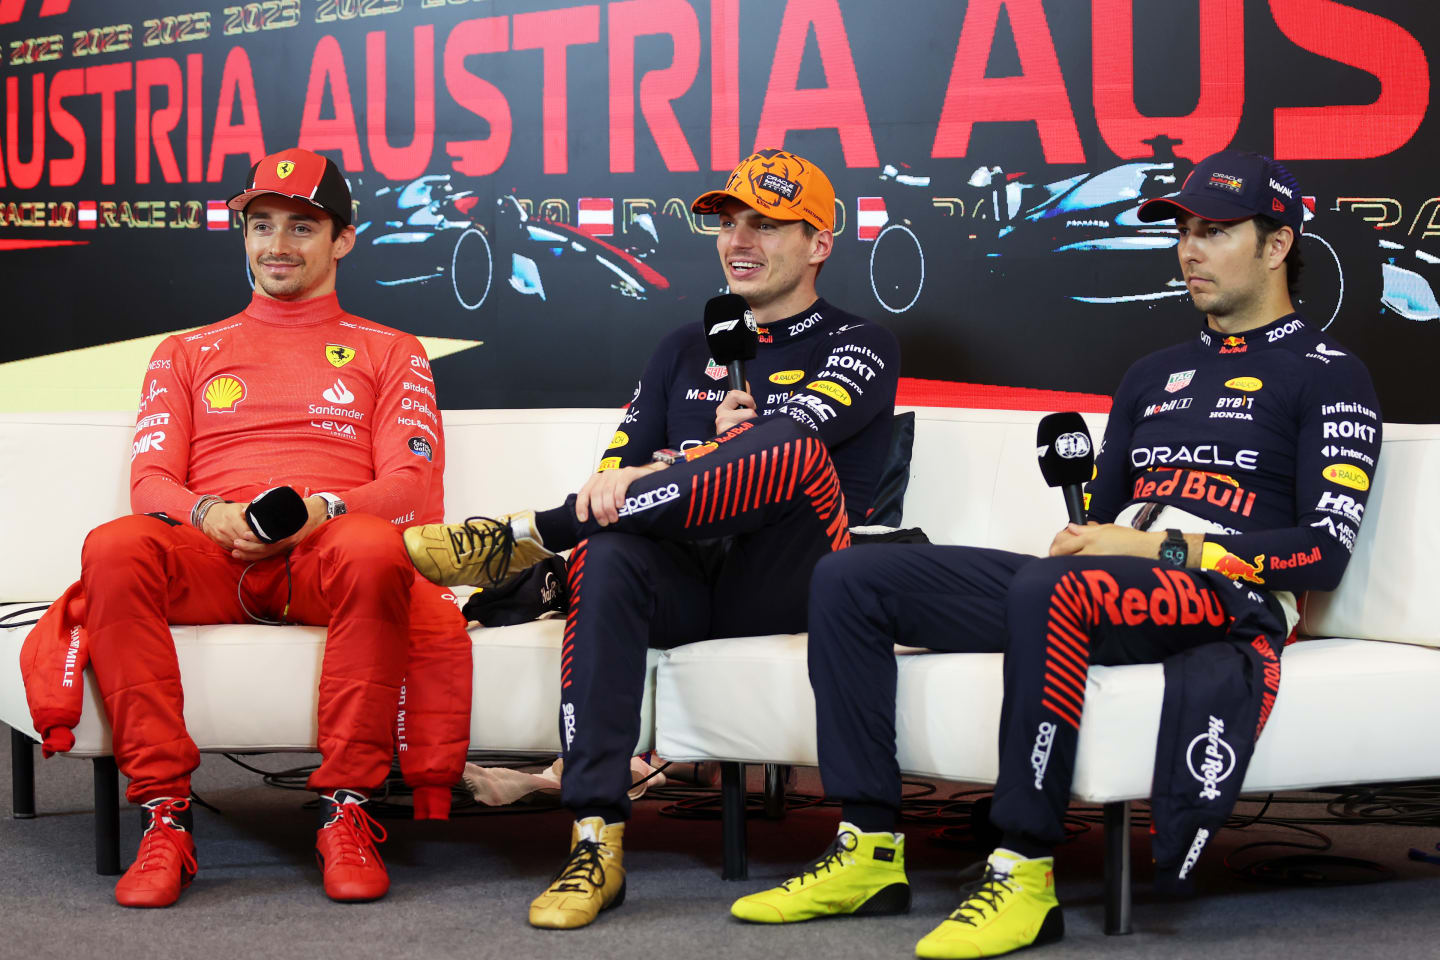 SPIELBERG, AUSTRIA - JULY 02: (L-R) Second placed Charles Leclerc of Monaco and Ferrari, Race